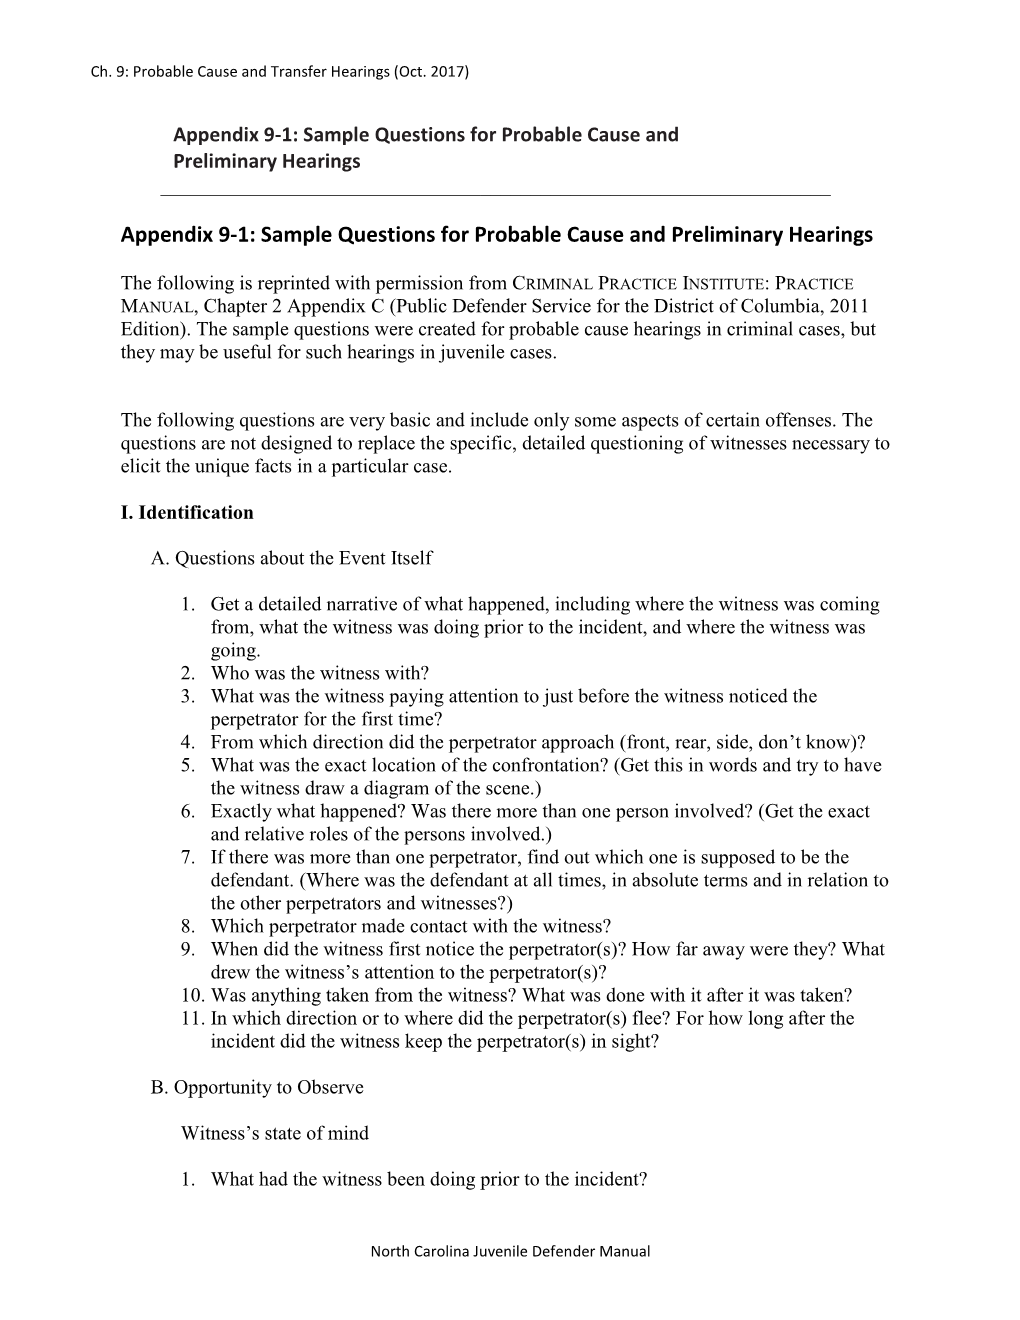 Sample Questions for Probable Cause and Preliminary Hearings ______